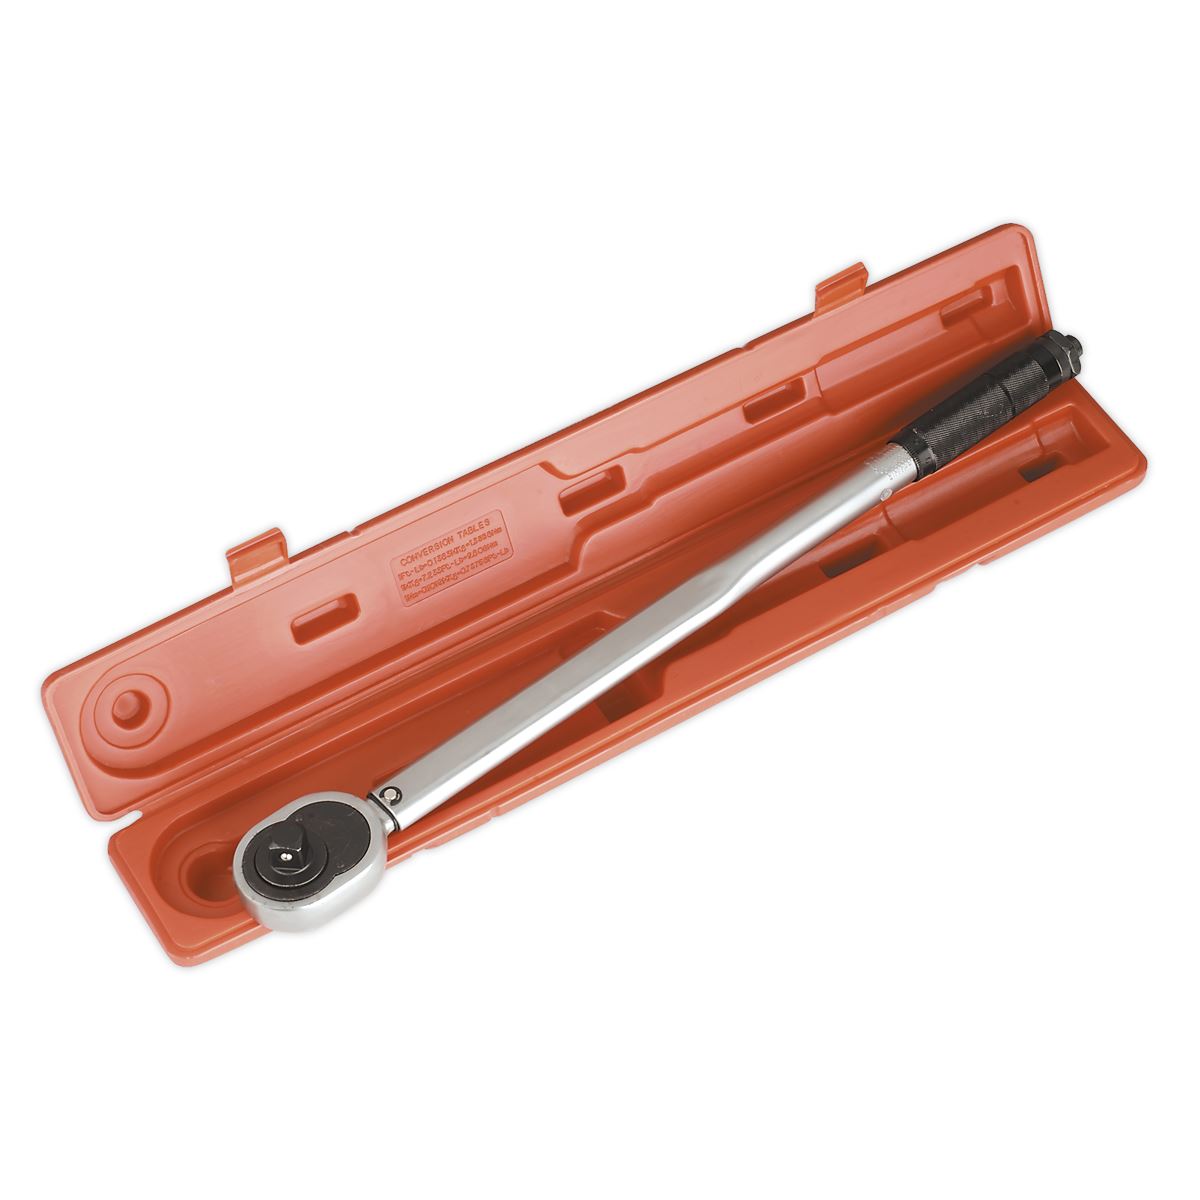 Sealey Premier Torque Wrench Micrometer Style 3/4"Sq Drive 70-420Nm(52-310lb.ft) - Calibrated